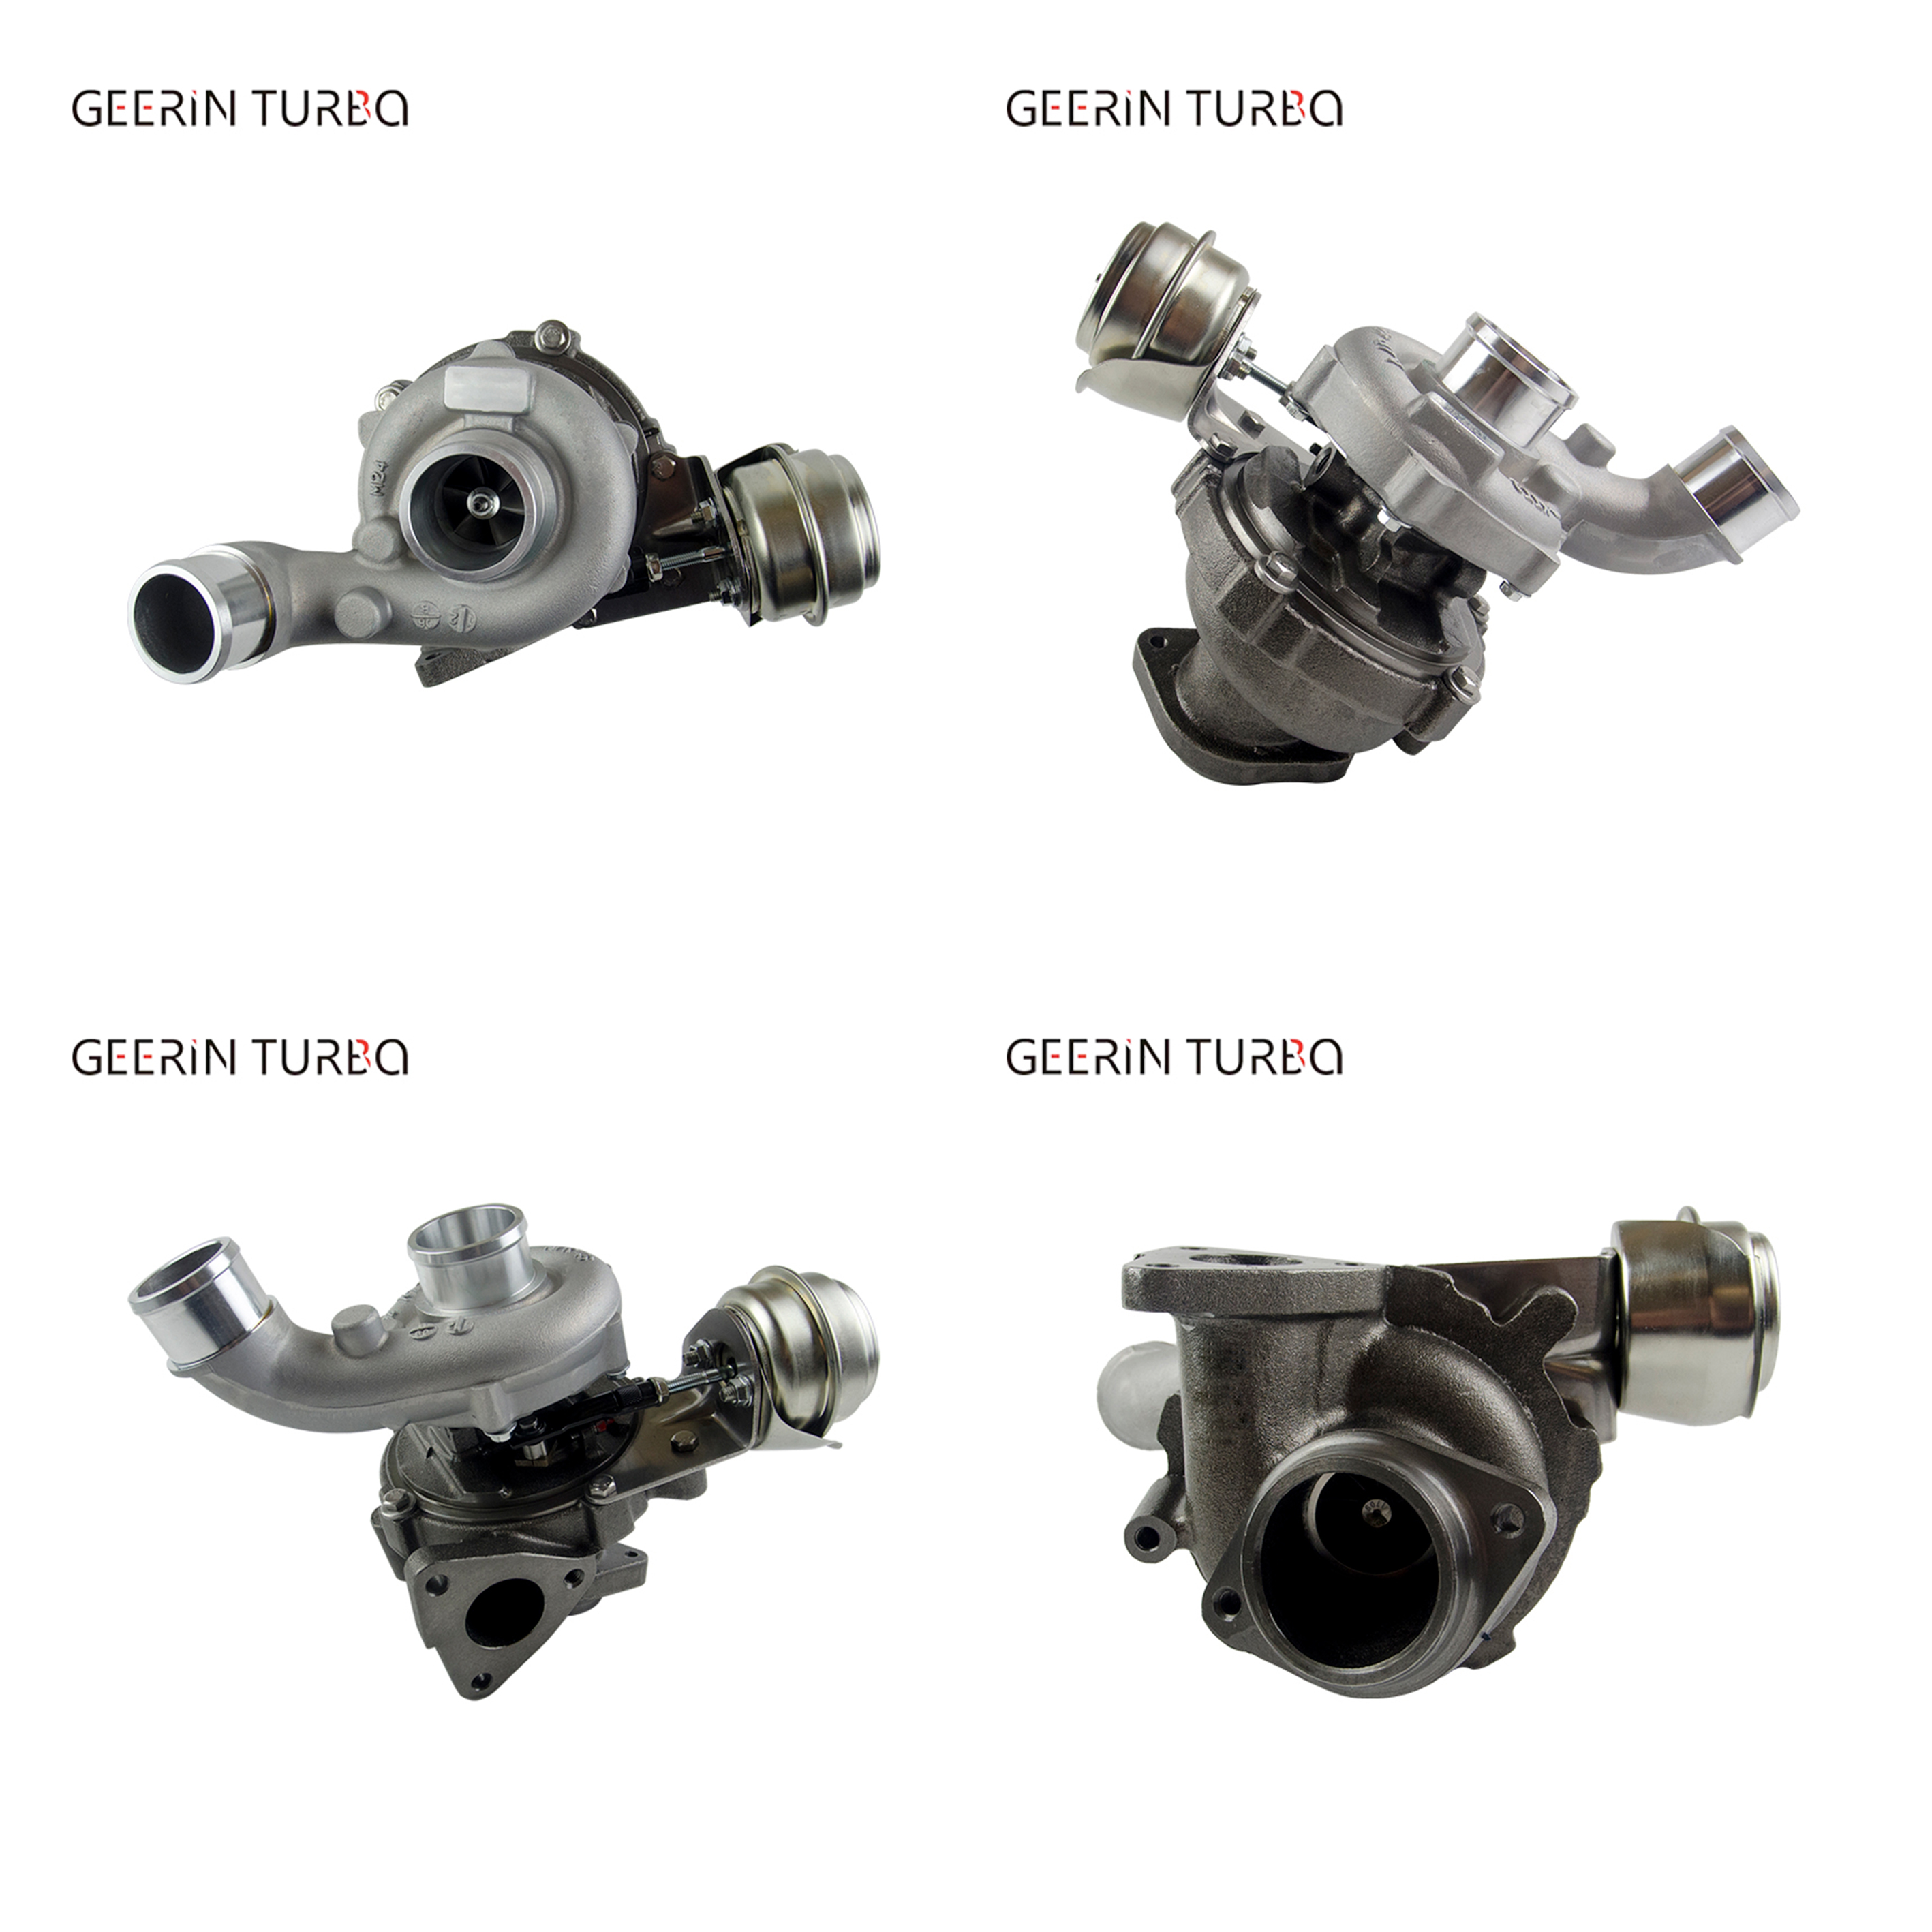 Acquista GT1549V 761433-5003S Turbocompressore completo Turbo Kit per Ssang-Yong Actyon 2.0 Xdi,GT1549V 761433-5003S Turbocompressore completo Turbo Kit per Ssang-Yong Actyon 2.0 Xdi prezzi,GT1549V 761433-5003S Turbocompressore completo Turbo Kit per Ssang-Yong Actyon 2.0 Xdi marche,GT1549V 761433-5003S Turbocompressore completo Turbo Kit per Ssang-Yong Actyon 2.0 Xdi Produttori,GT1549V 761433-5003S Turbocompressore completo Turbo Kit per Ssang-Yong Actyon 2.0 Xdi Citazioni,GT1549V 761433-5003S Turbocompressore completo Turbo Kit per Ssang-Yong Actyon 2.0 Xdi  l'azienda,